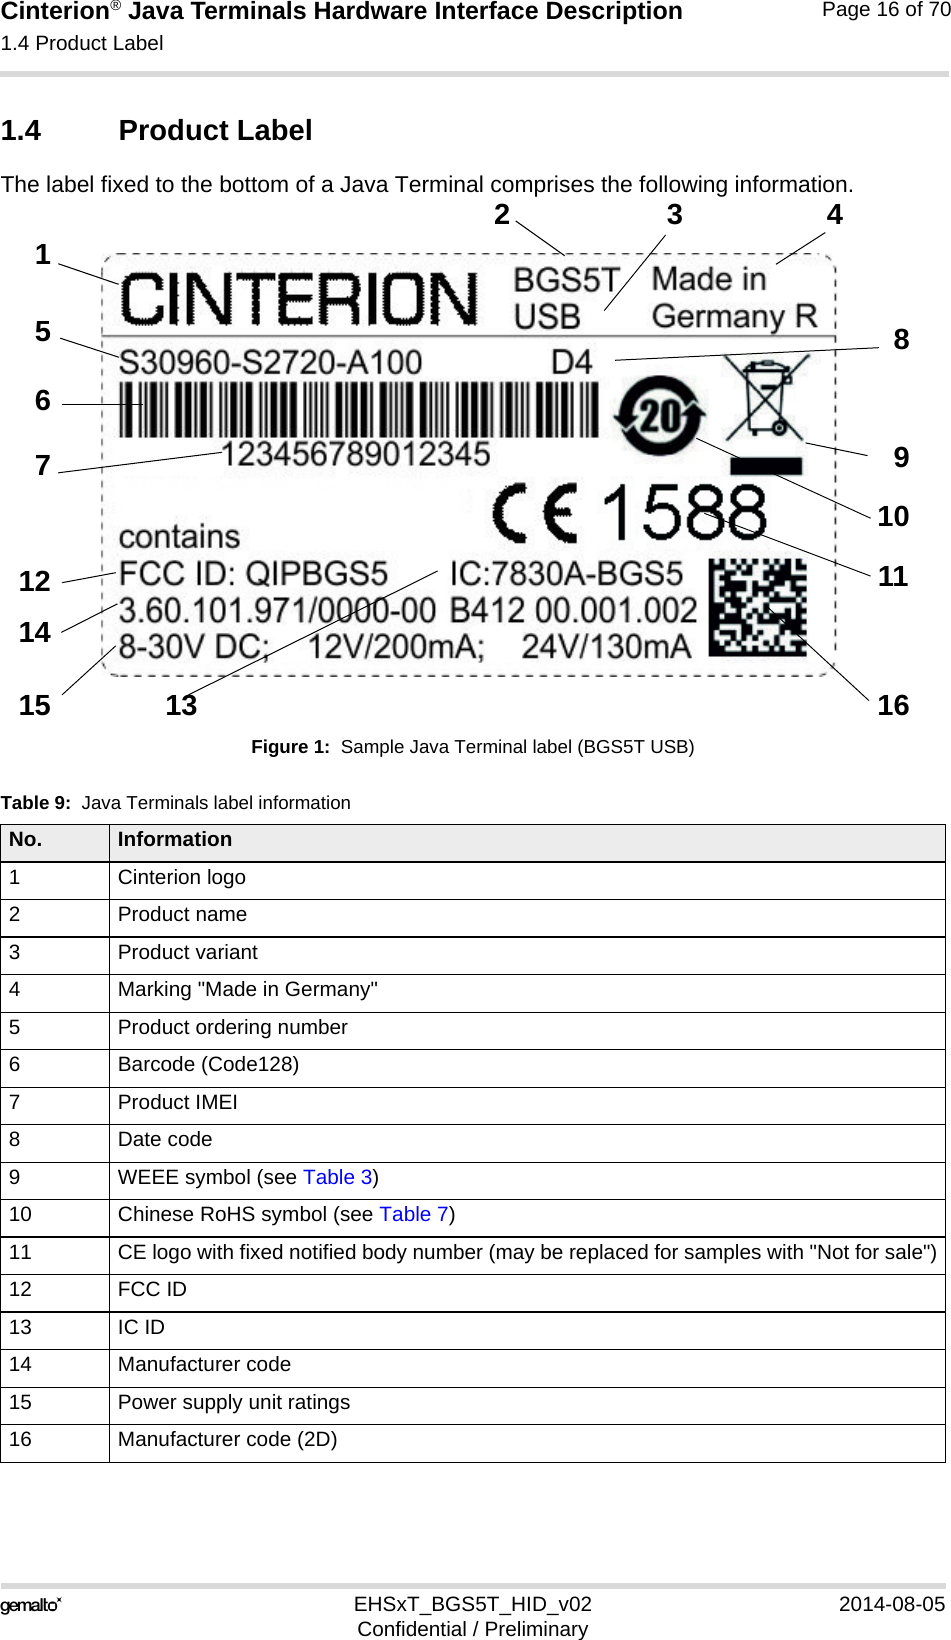 Cinterion® Java Terminals Hardware Interface Description1.4 Product Label16EHSxT_BGS5T_HID_v02 2014-08-05Confidential / PreliminaryPage 16 of 701.4 Product LabelThe label fixed to the bottom of a Java Terminal comprises the following information.Figure 1:  Sample Java Terminal label (BGS5T USB)Table 9:  Java Terminals label informationNo. Information1 Cinterion logo2 Product name3 Product variant4 Marking &quot;Made in Germany&quot;5 Product ordering number6 Barcode (Code128)7 Product IMEI8 Date code9 WEEE symbol (see Table 3)10 Chinese RoHS symbol (see Table 7)11 CE logo with fixed notified body number (may be replaced for samples with &quot;Not for sale&quot;)12 FCC ID13 IC ID14 Manufacturer code15 Power supply unit ratings16 Manufacturer code (2D)1234567891012131415 1611